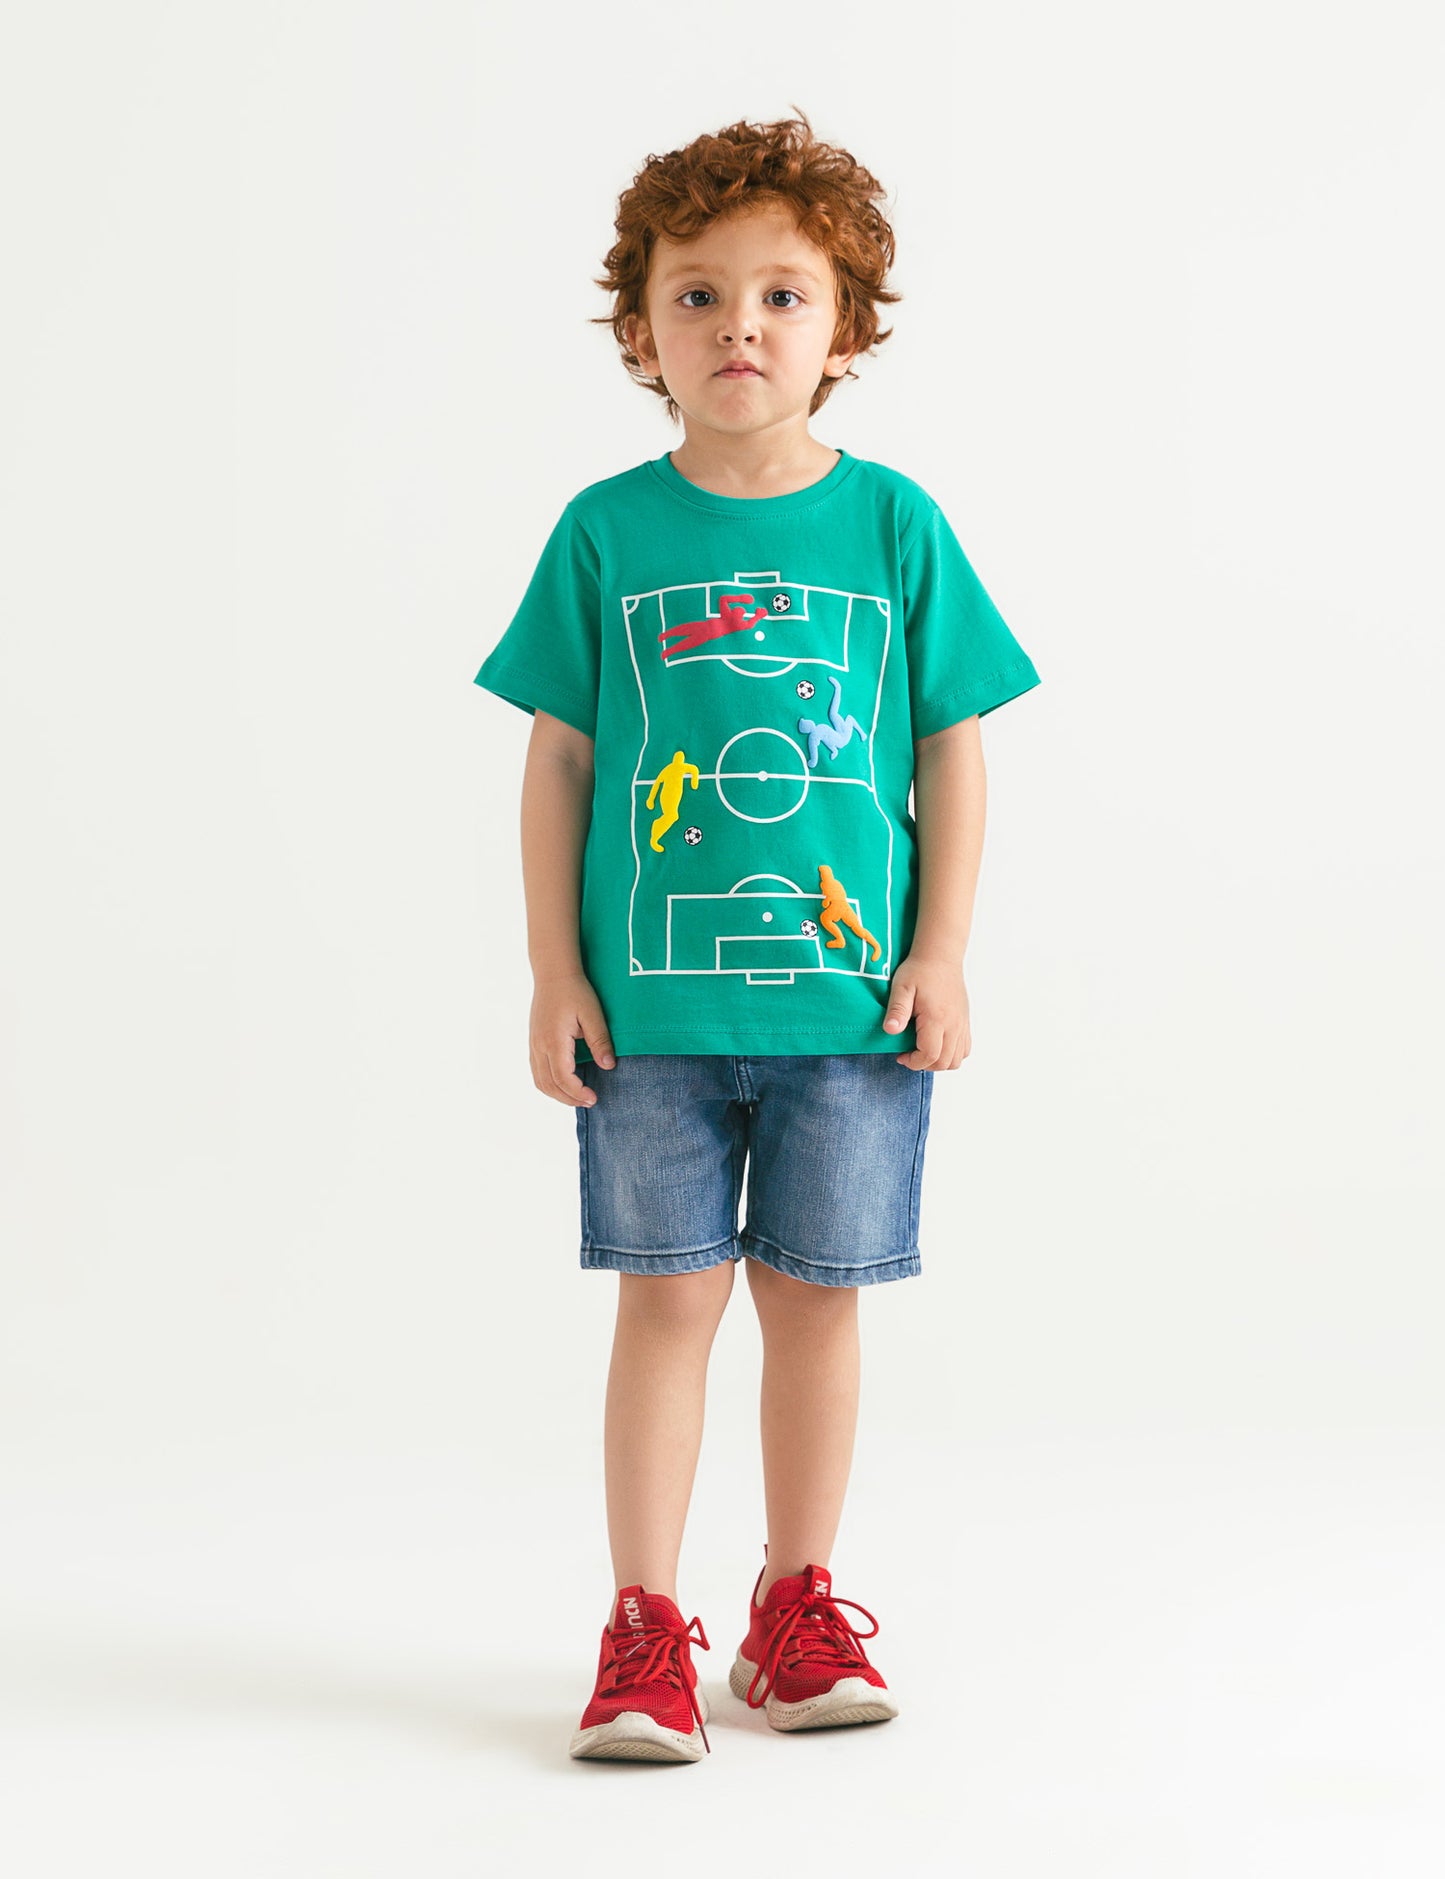 SOCCER GRAPHIC T-SHIRT